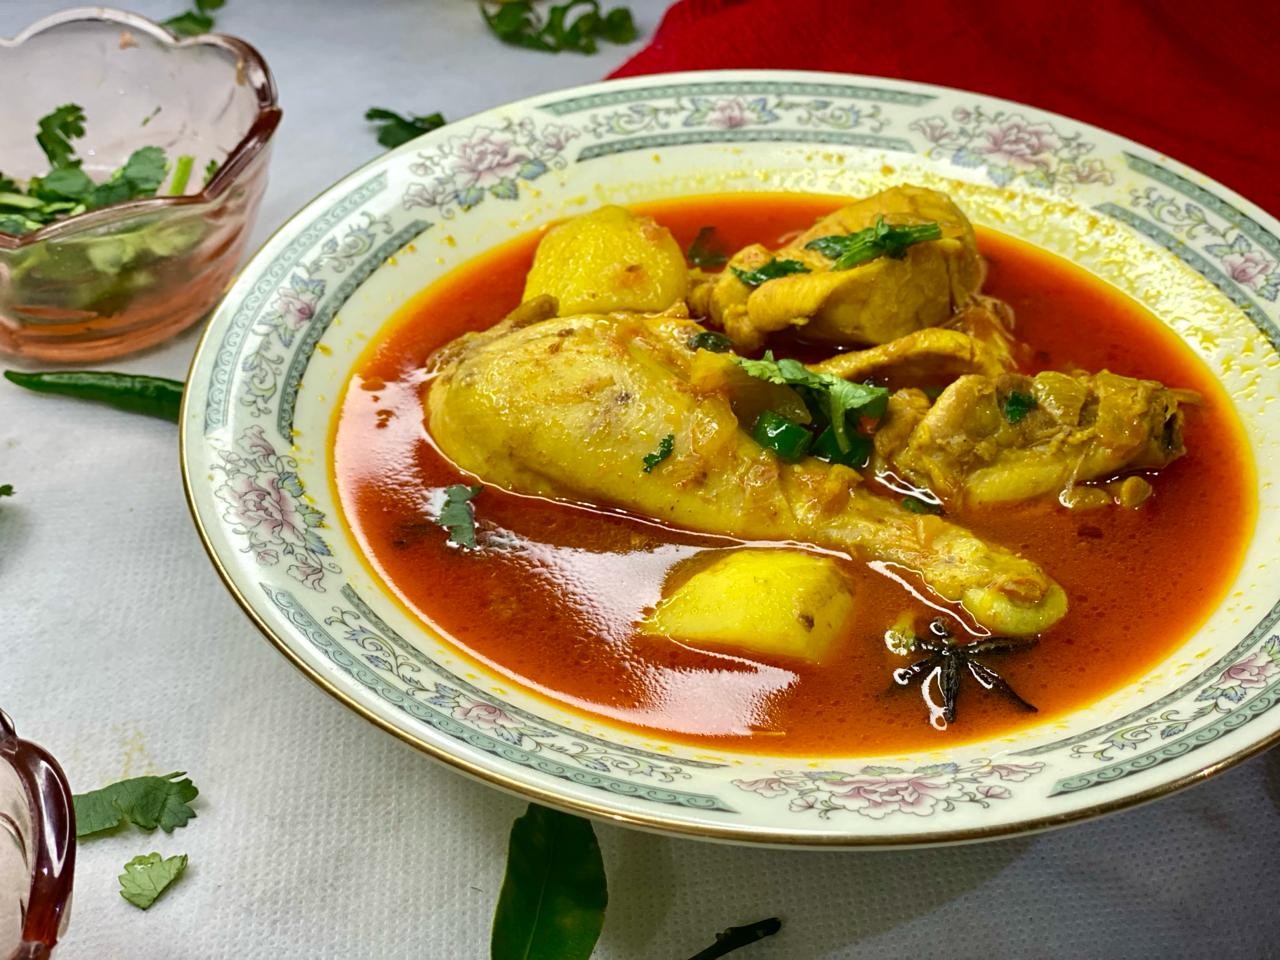 Variations And Additions Of ‘Chicken ka Salan’